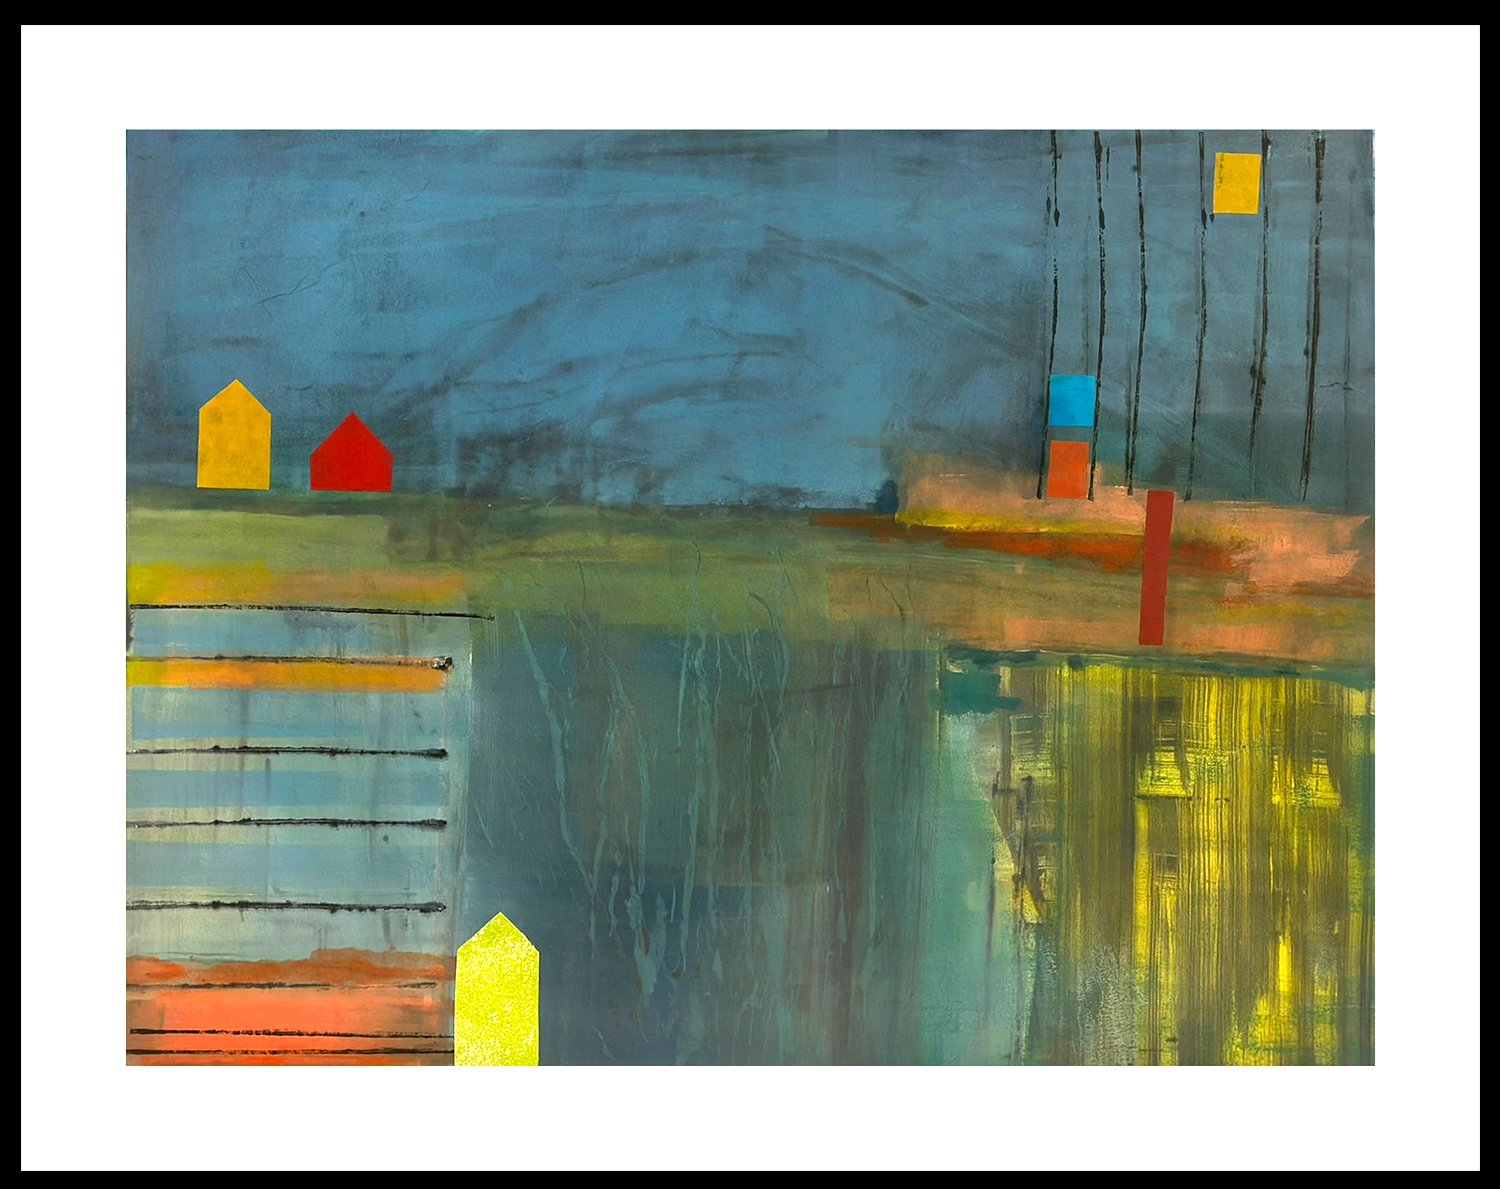    All Around the Neighborhood   takes me back to carefree days of childhood where the neighborhood kids would go from house to house. Mixed Media Monotype, Plate size 18 x 24”, custom mat and navy blue wood frame, 27.5 x 33”  1/1   SOLD  